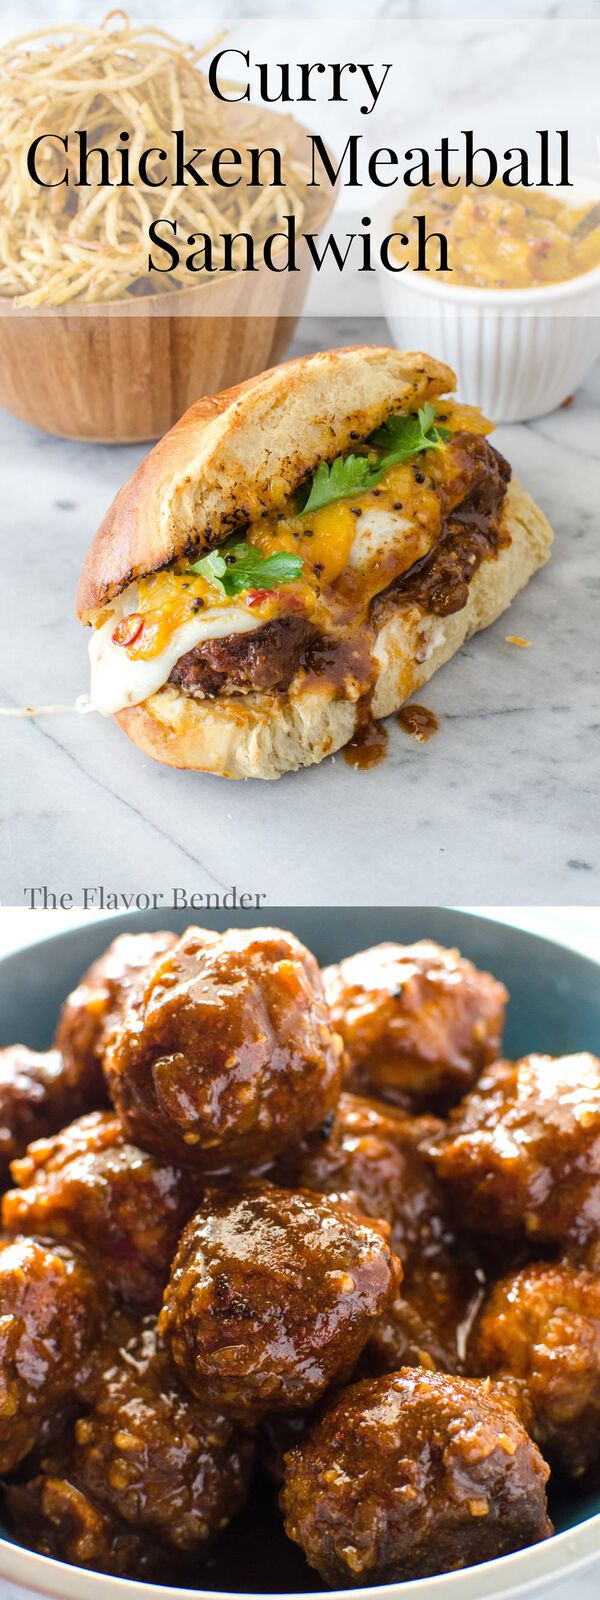 Curry Chicken Meatball Sandwich - Take your Meat Ball Subs to the next level with these Chicken meatballs made from scratch in a delicious spicy curry sauce and served in rolls with melted cheese and a cold, sweet and spicy mango chutney. 